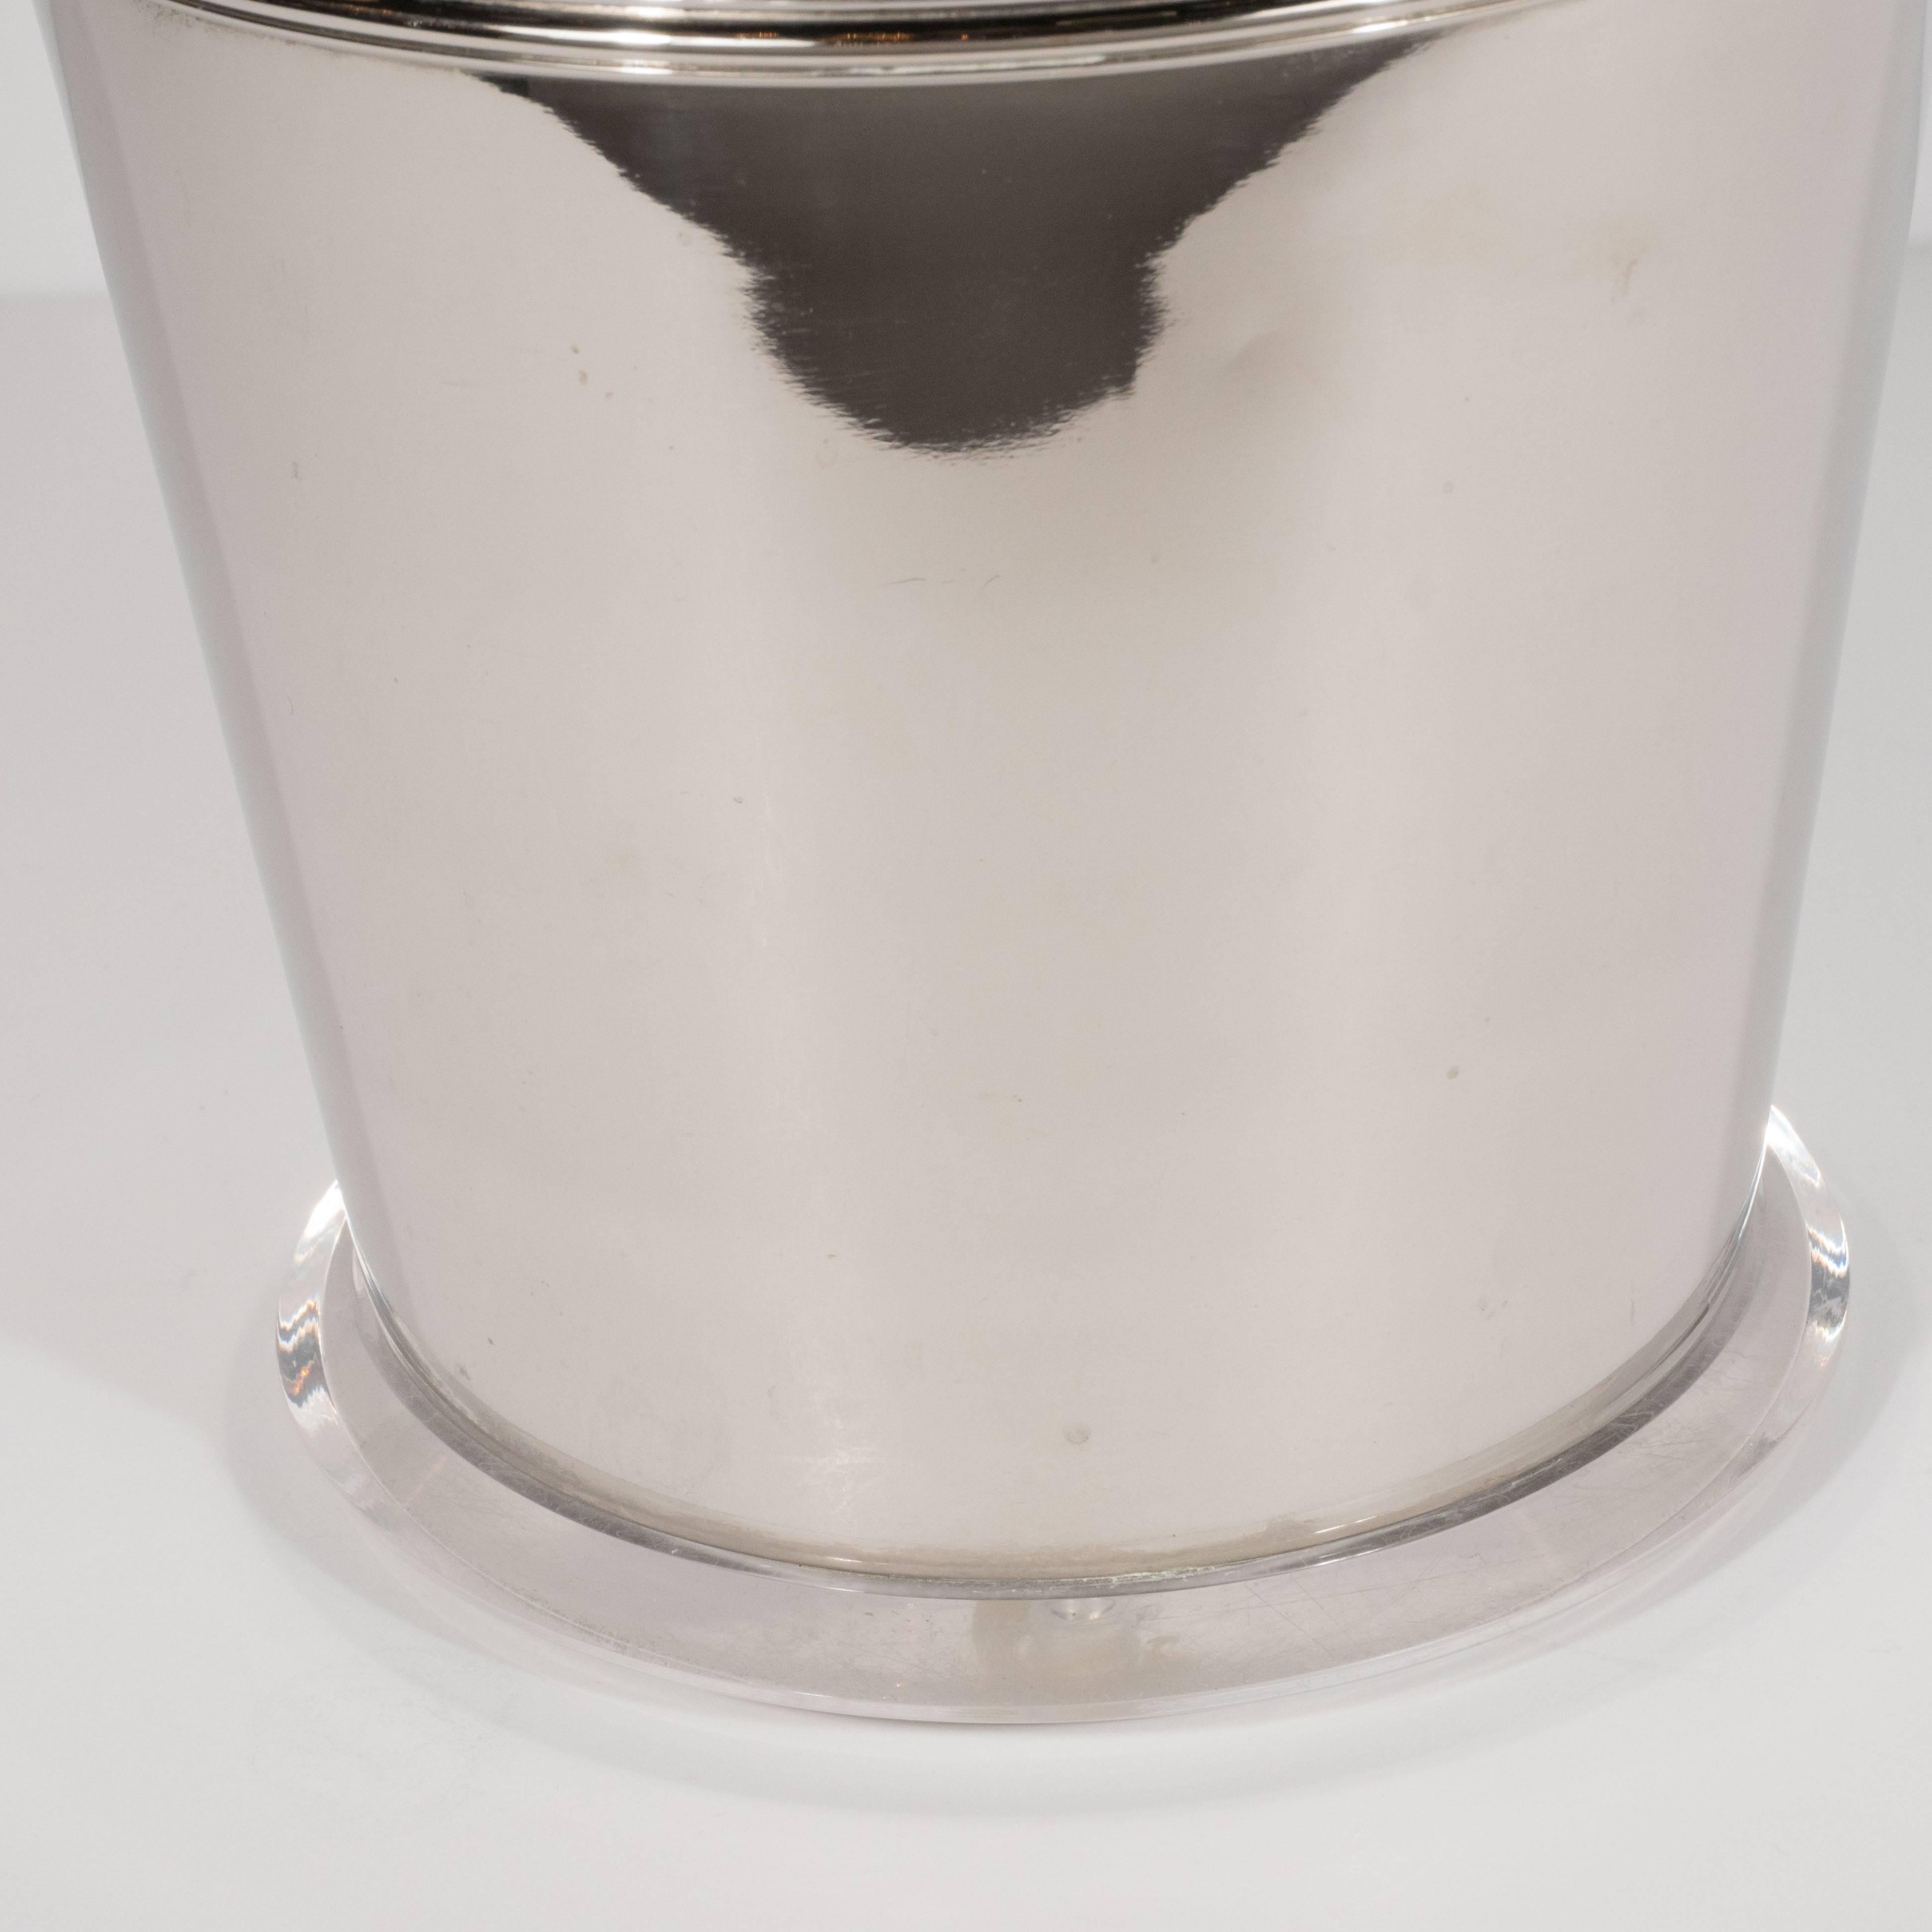 Late 20th Century Italian Mid-Century Modern Chrome and Lucite Ice Bucket by Montagnini & Co.